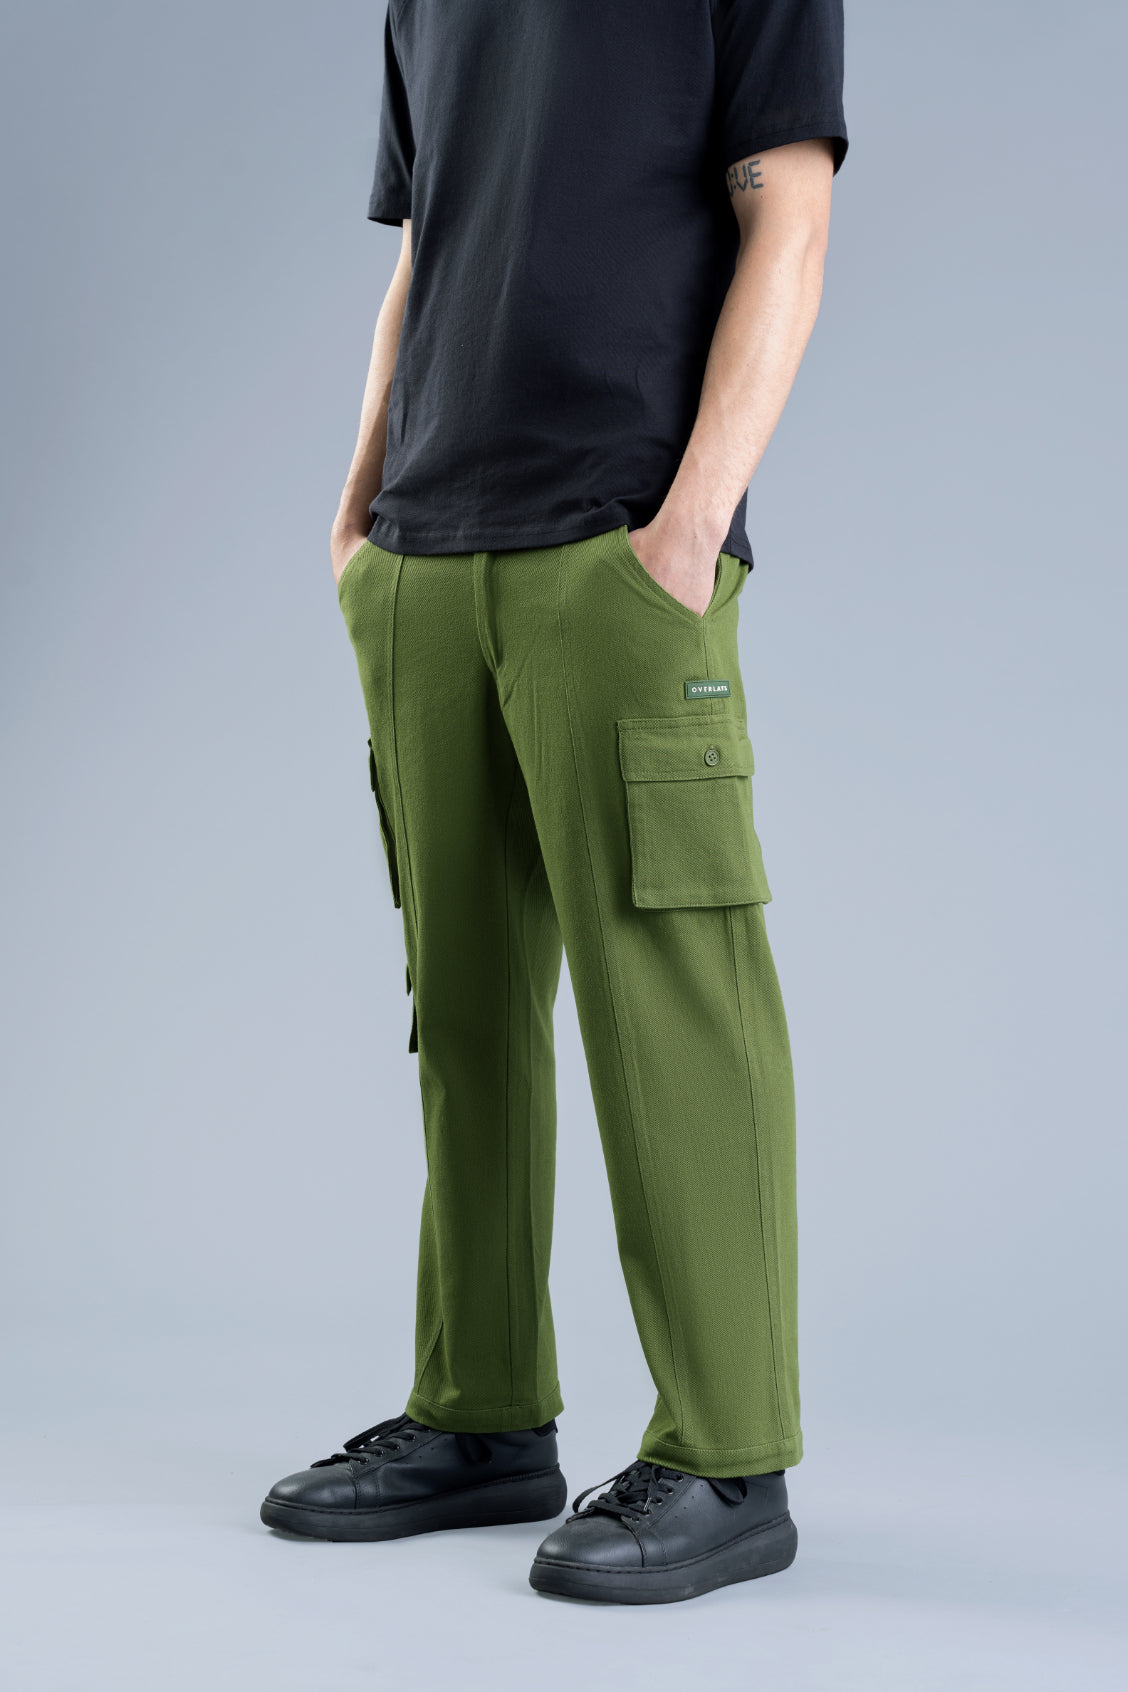 Mens Dark Olive Green 100 Linen Pants Tapered Relaxed Fit- Cholp